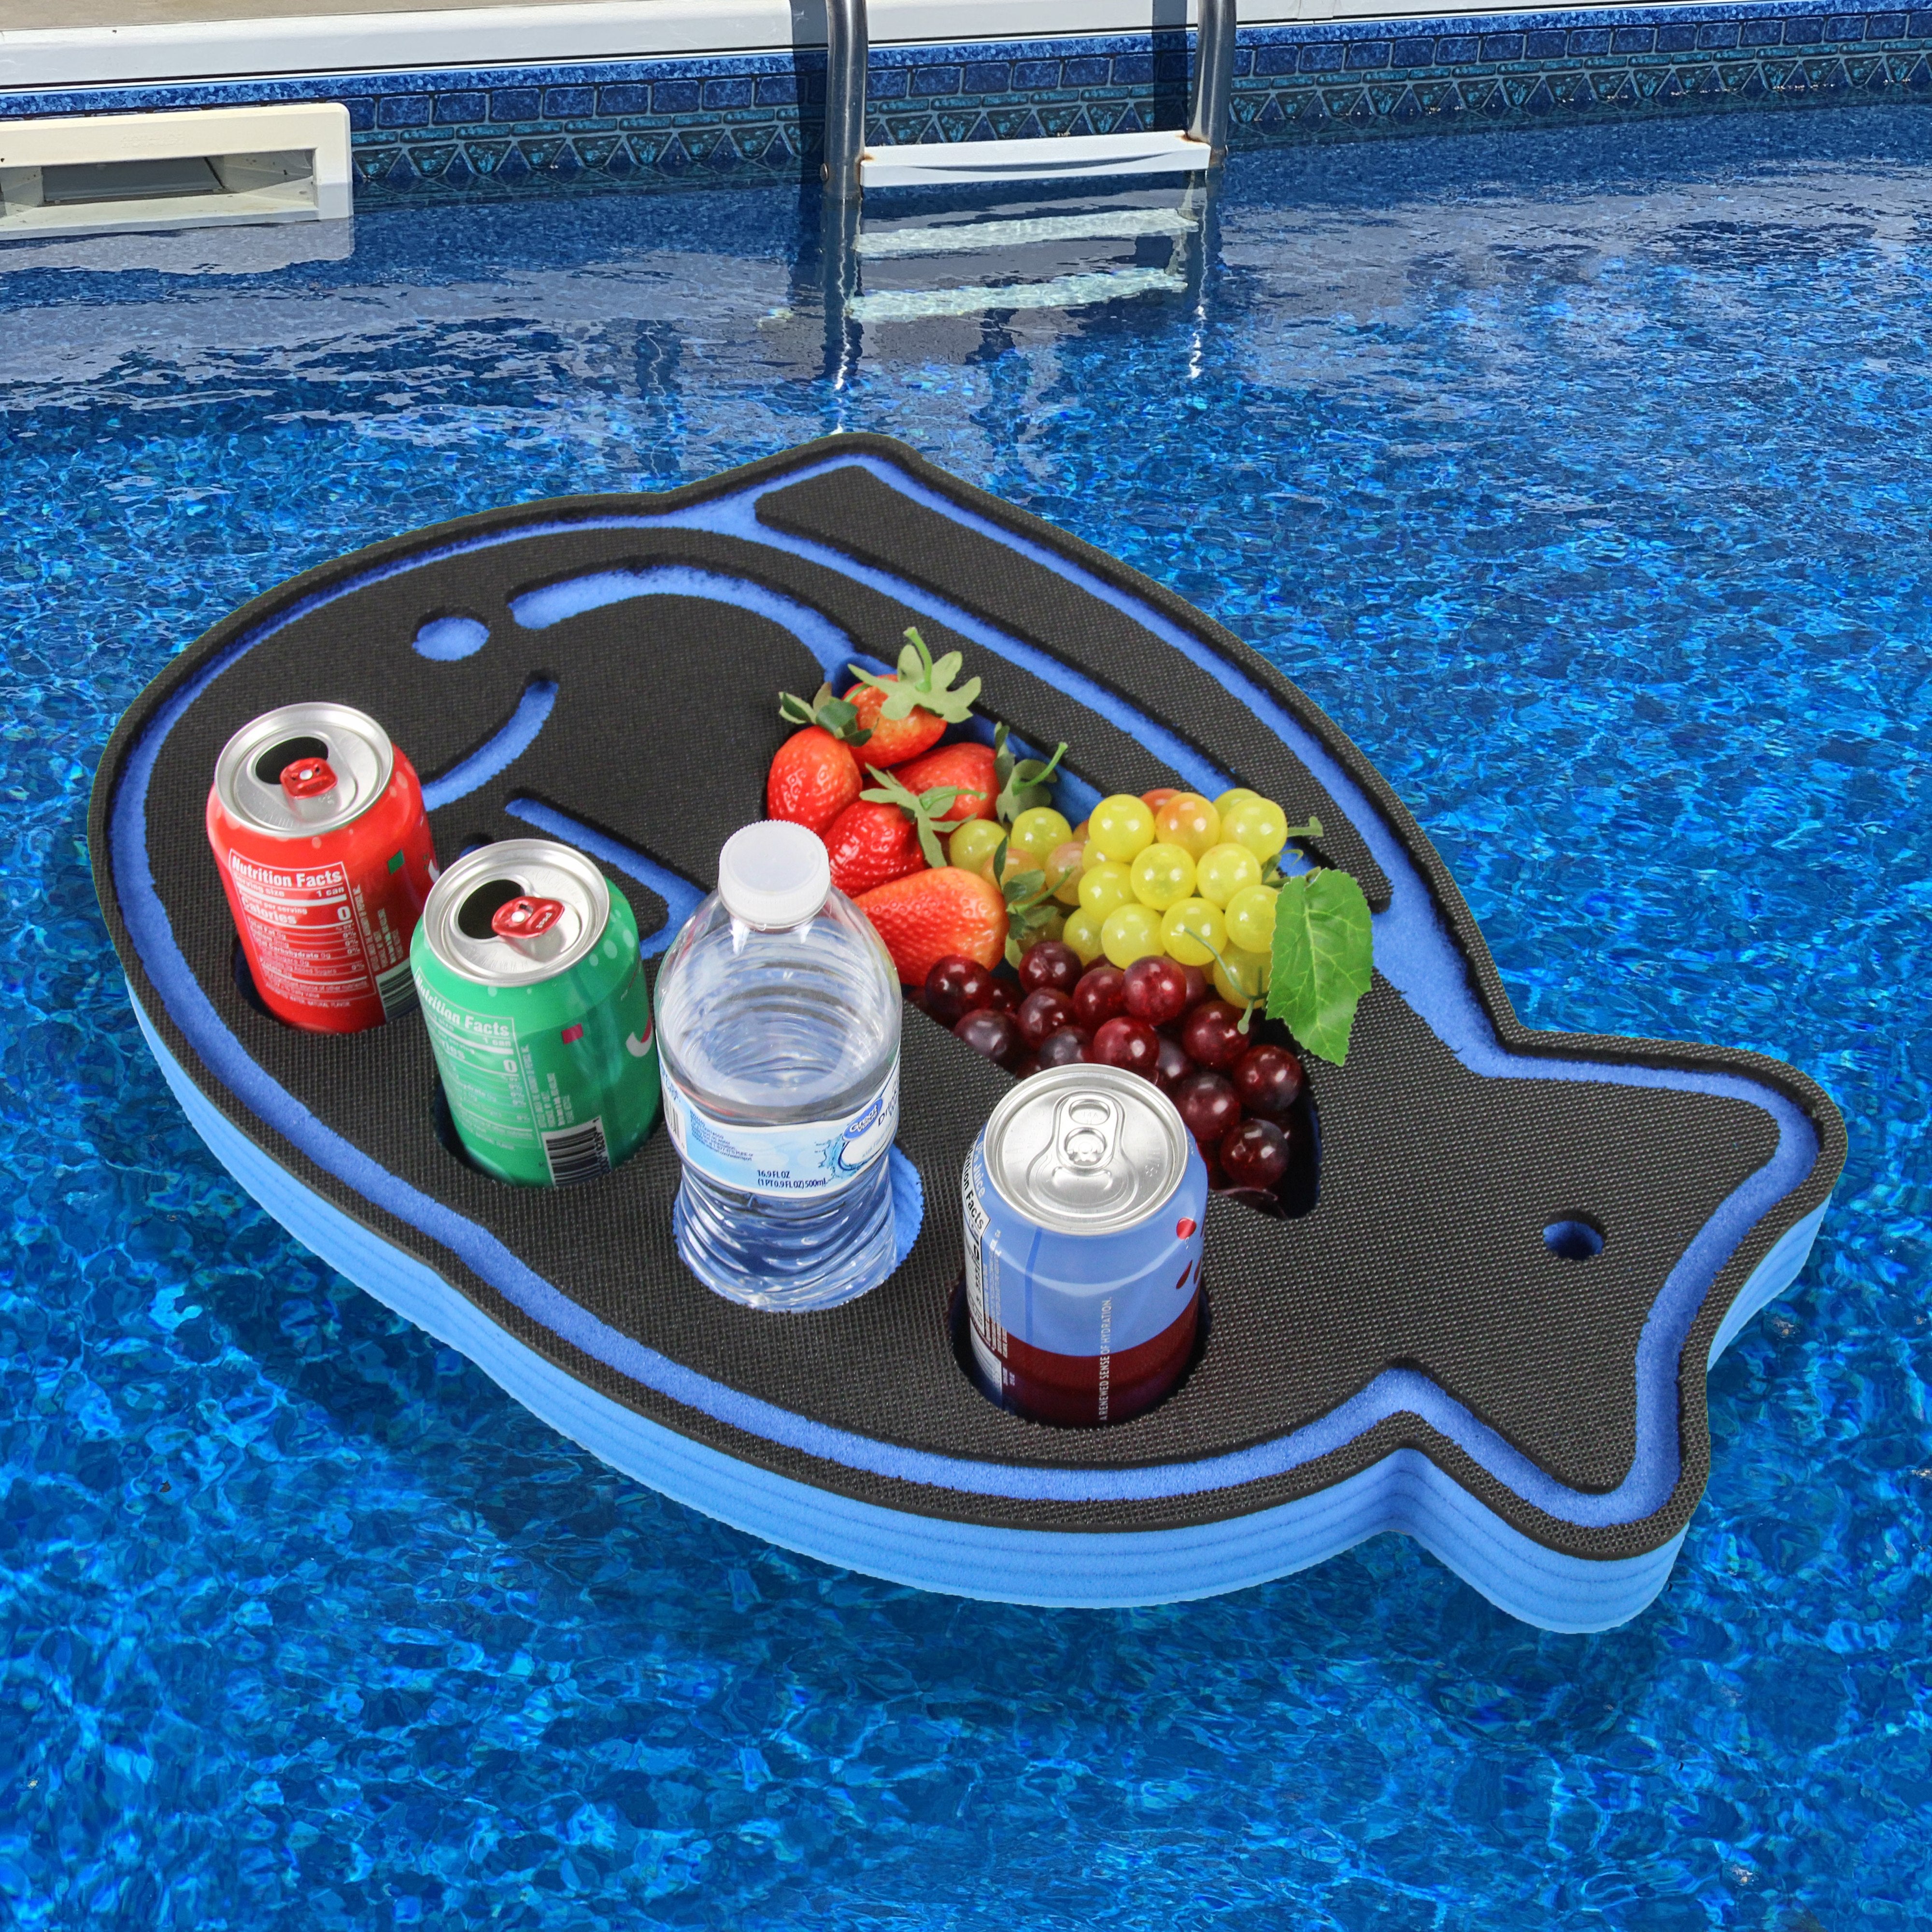 Tang Fish Shape Drink Holder Refreshment Table Tray Pool Beach Party Flower Float Lounge Durable Foam 5 Compartment UV Resistant Cup Holders 23 Inch